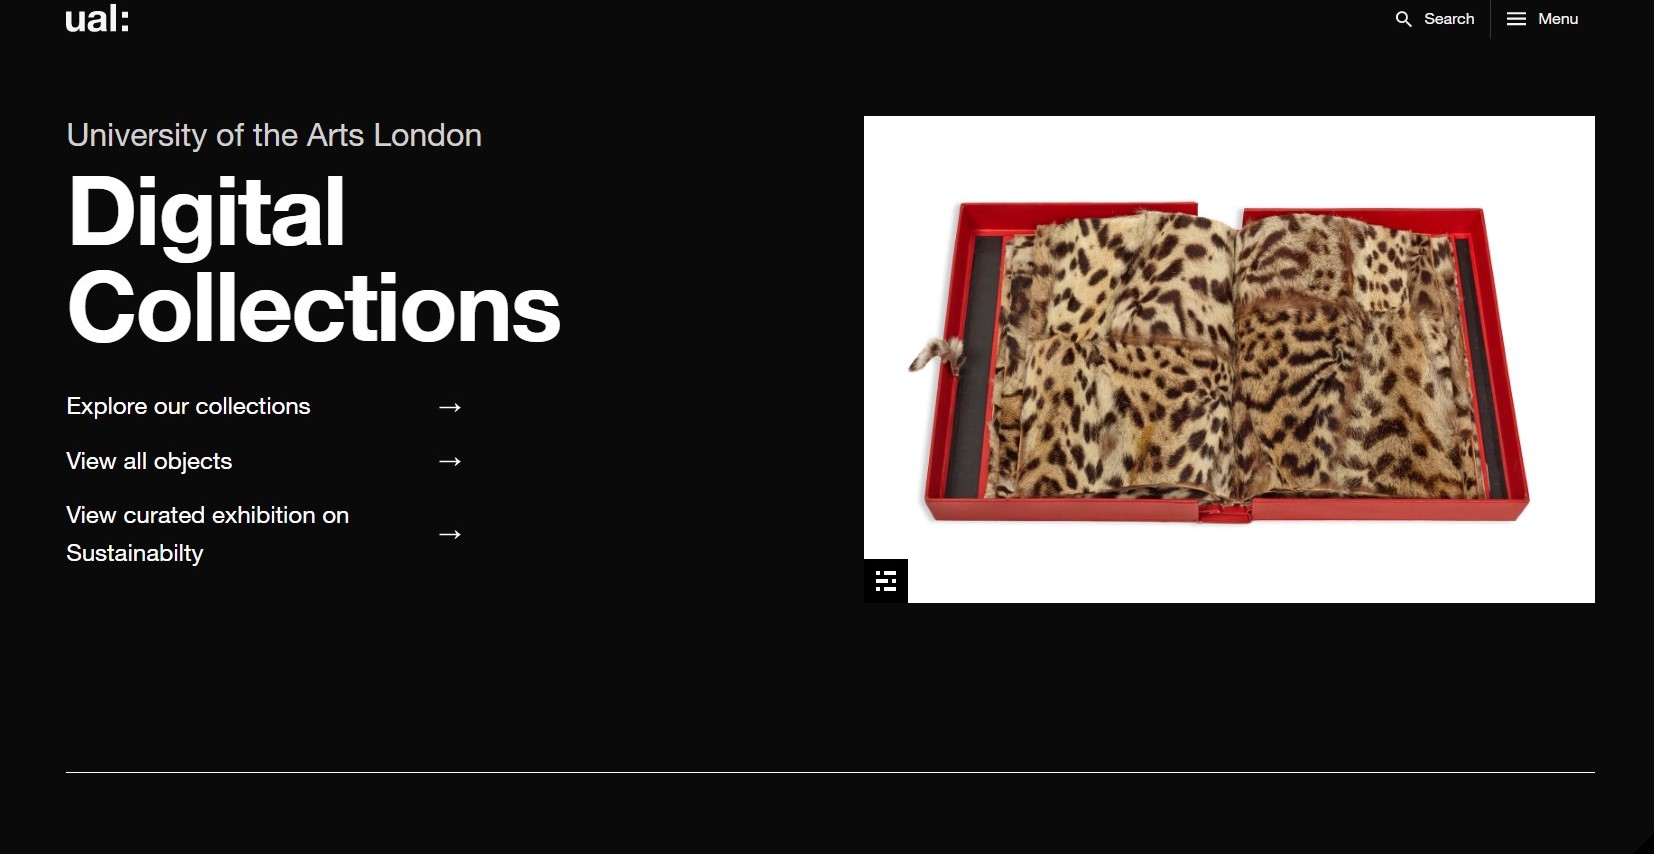 Screenshot of website with image of leopard skin book